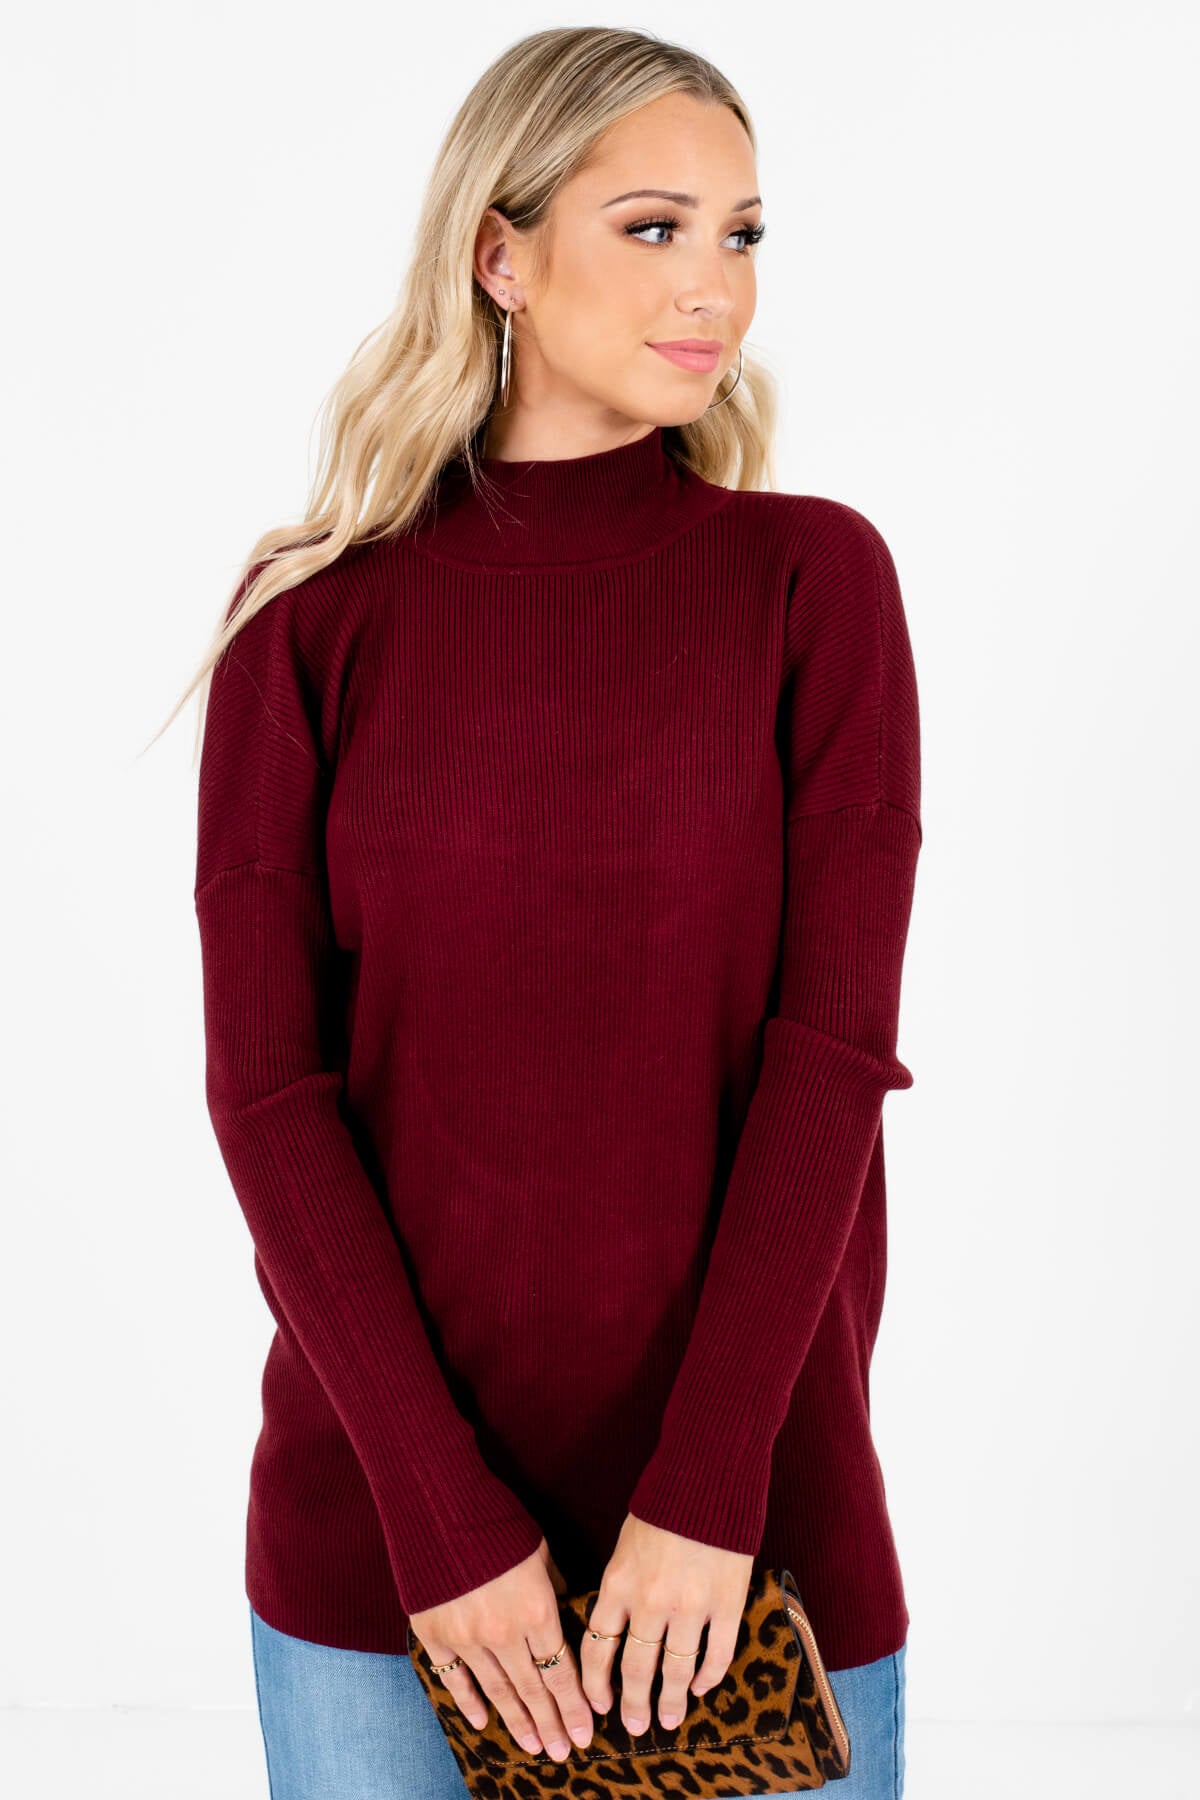 Burgundy Open Back Style Boutique Sweaters for Women